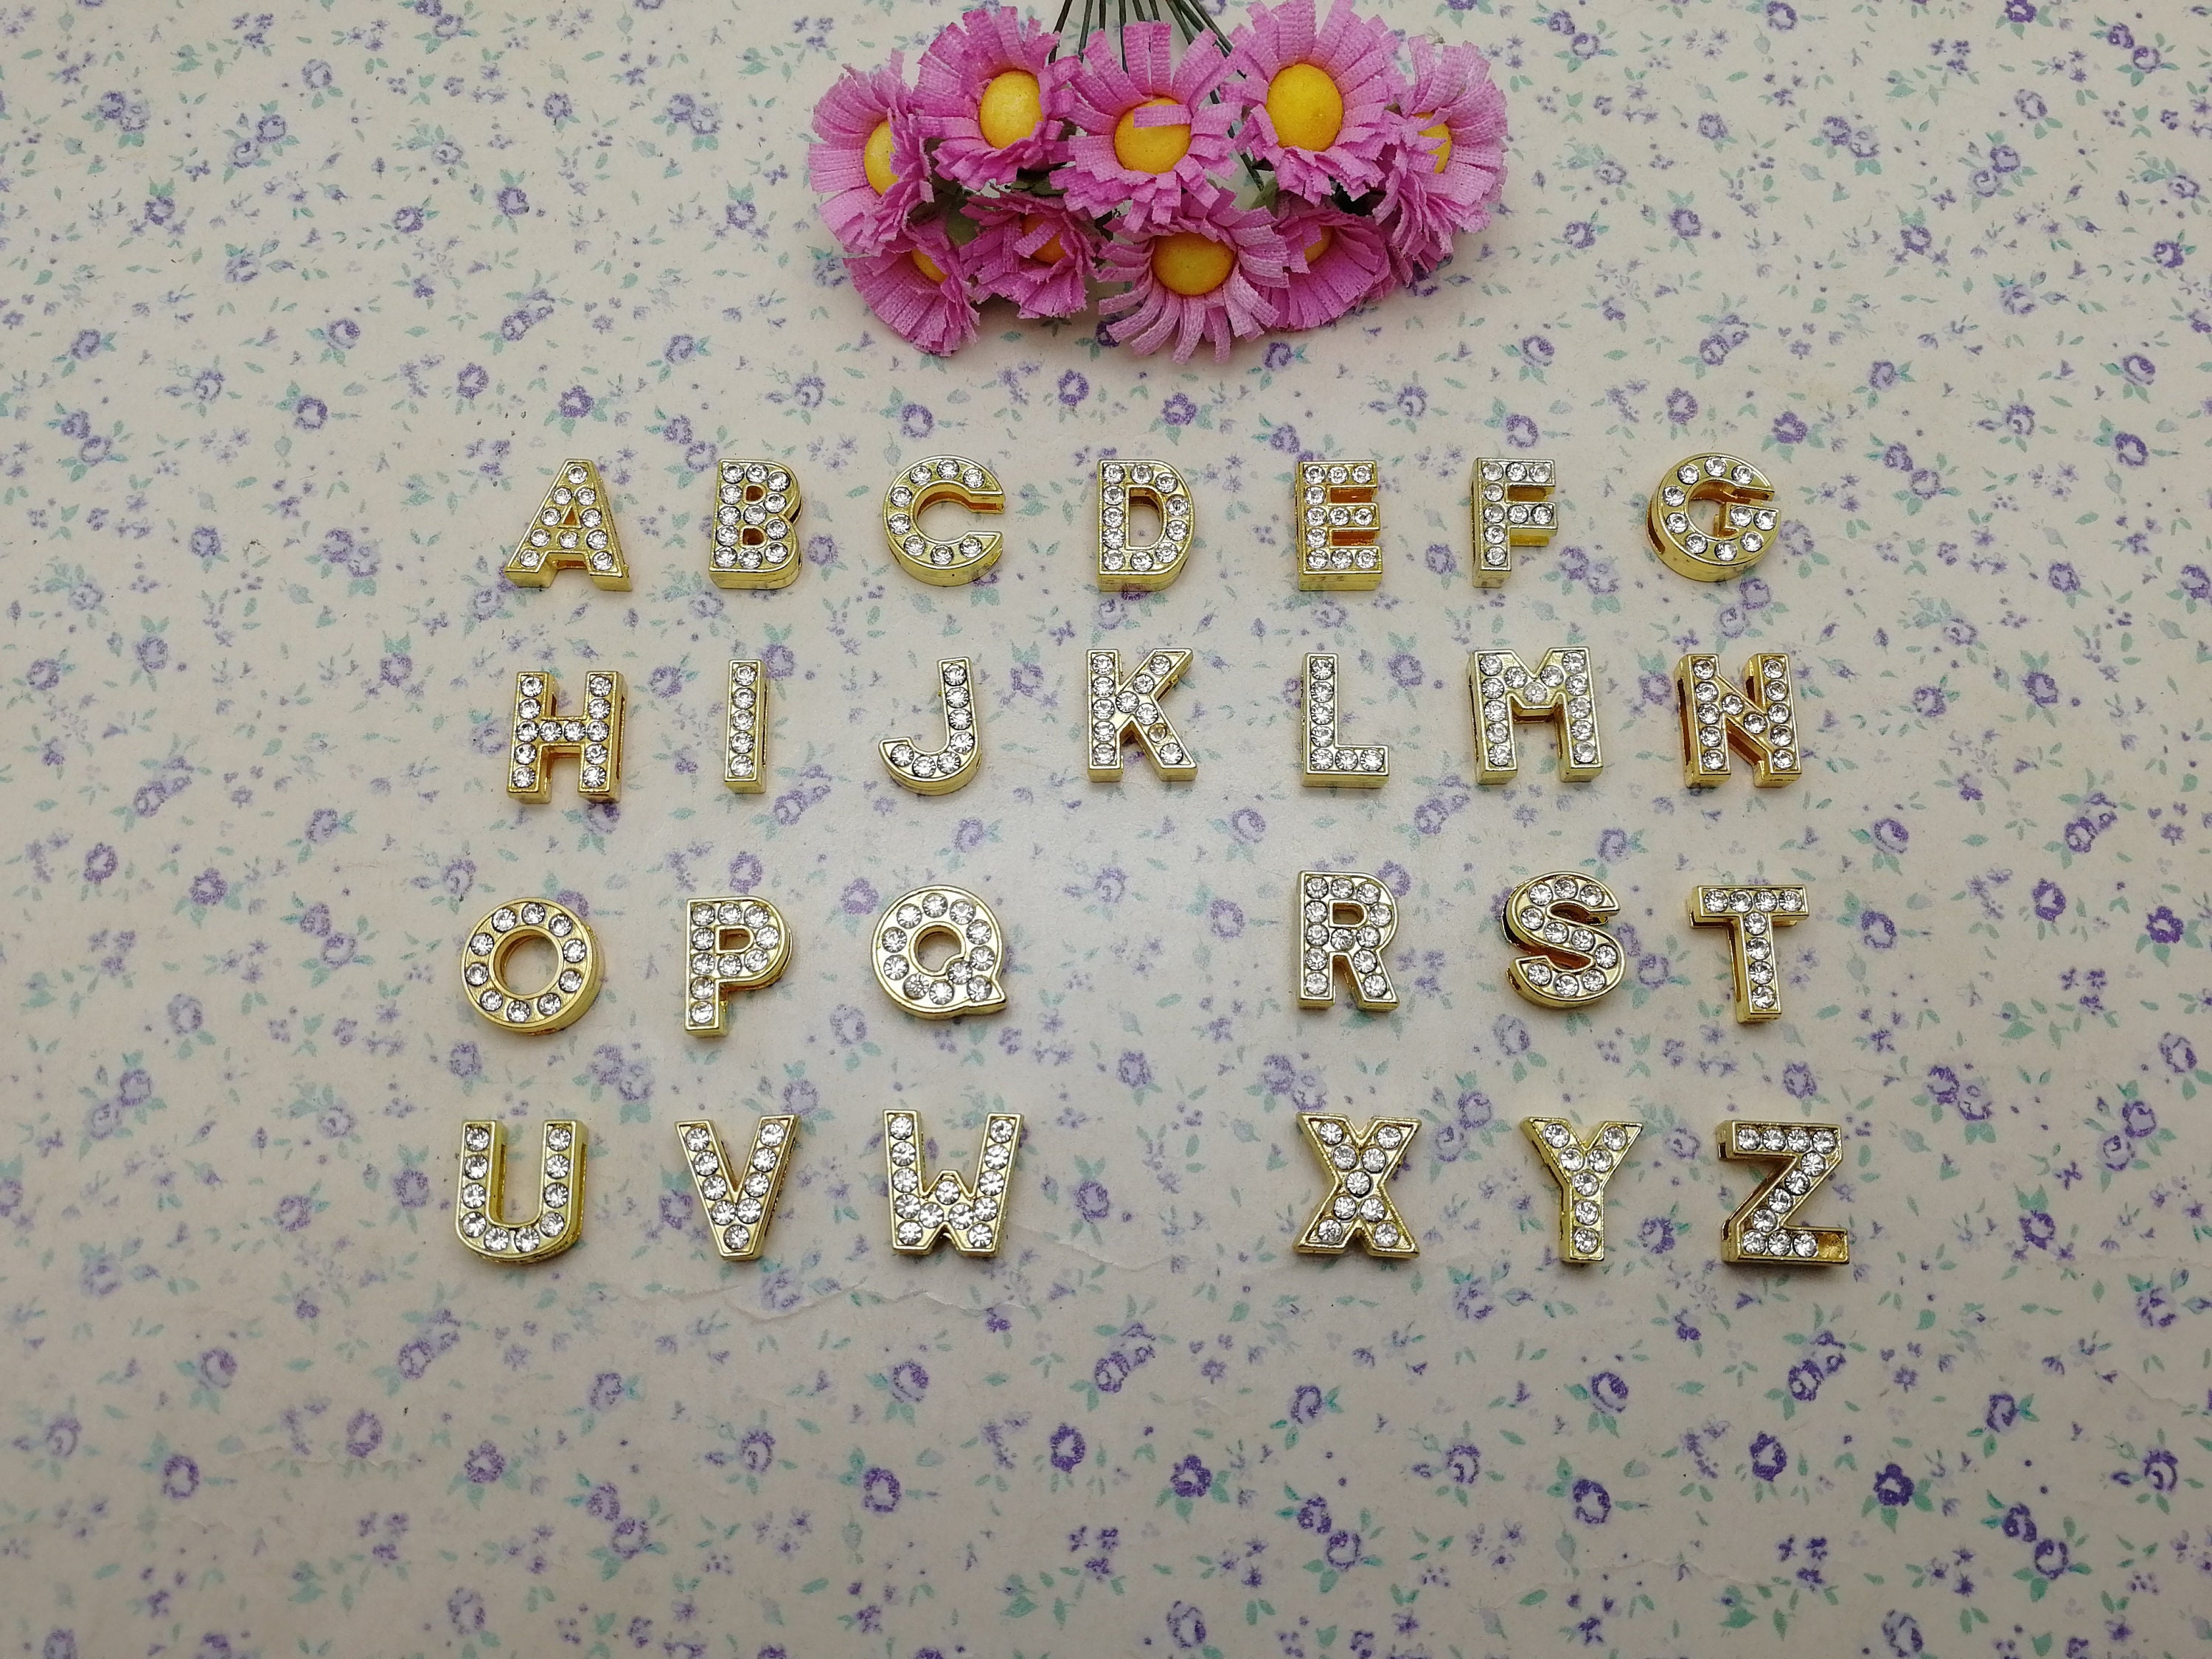  EXCEART 52pcs Rhinestone Letter Ring Jewelry Accessories A-z Letter  Charms Jewelry Bracelets Diy Pendant Bracelet Letter Rhinestone Letters  Iron on Bling Letters Crystal Beads Manual Metal : Arts, Crafts & Sewing